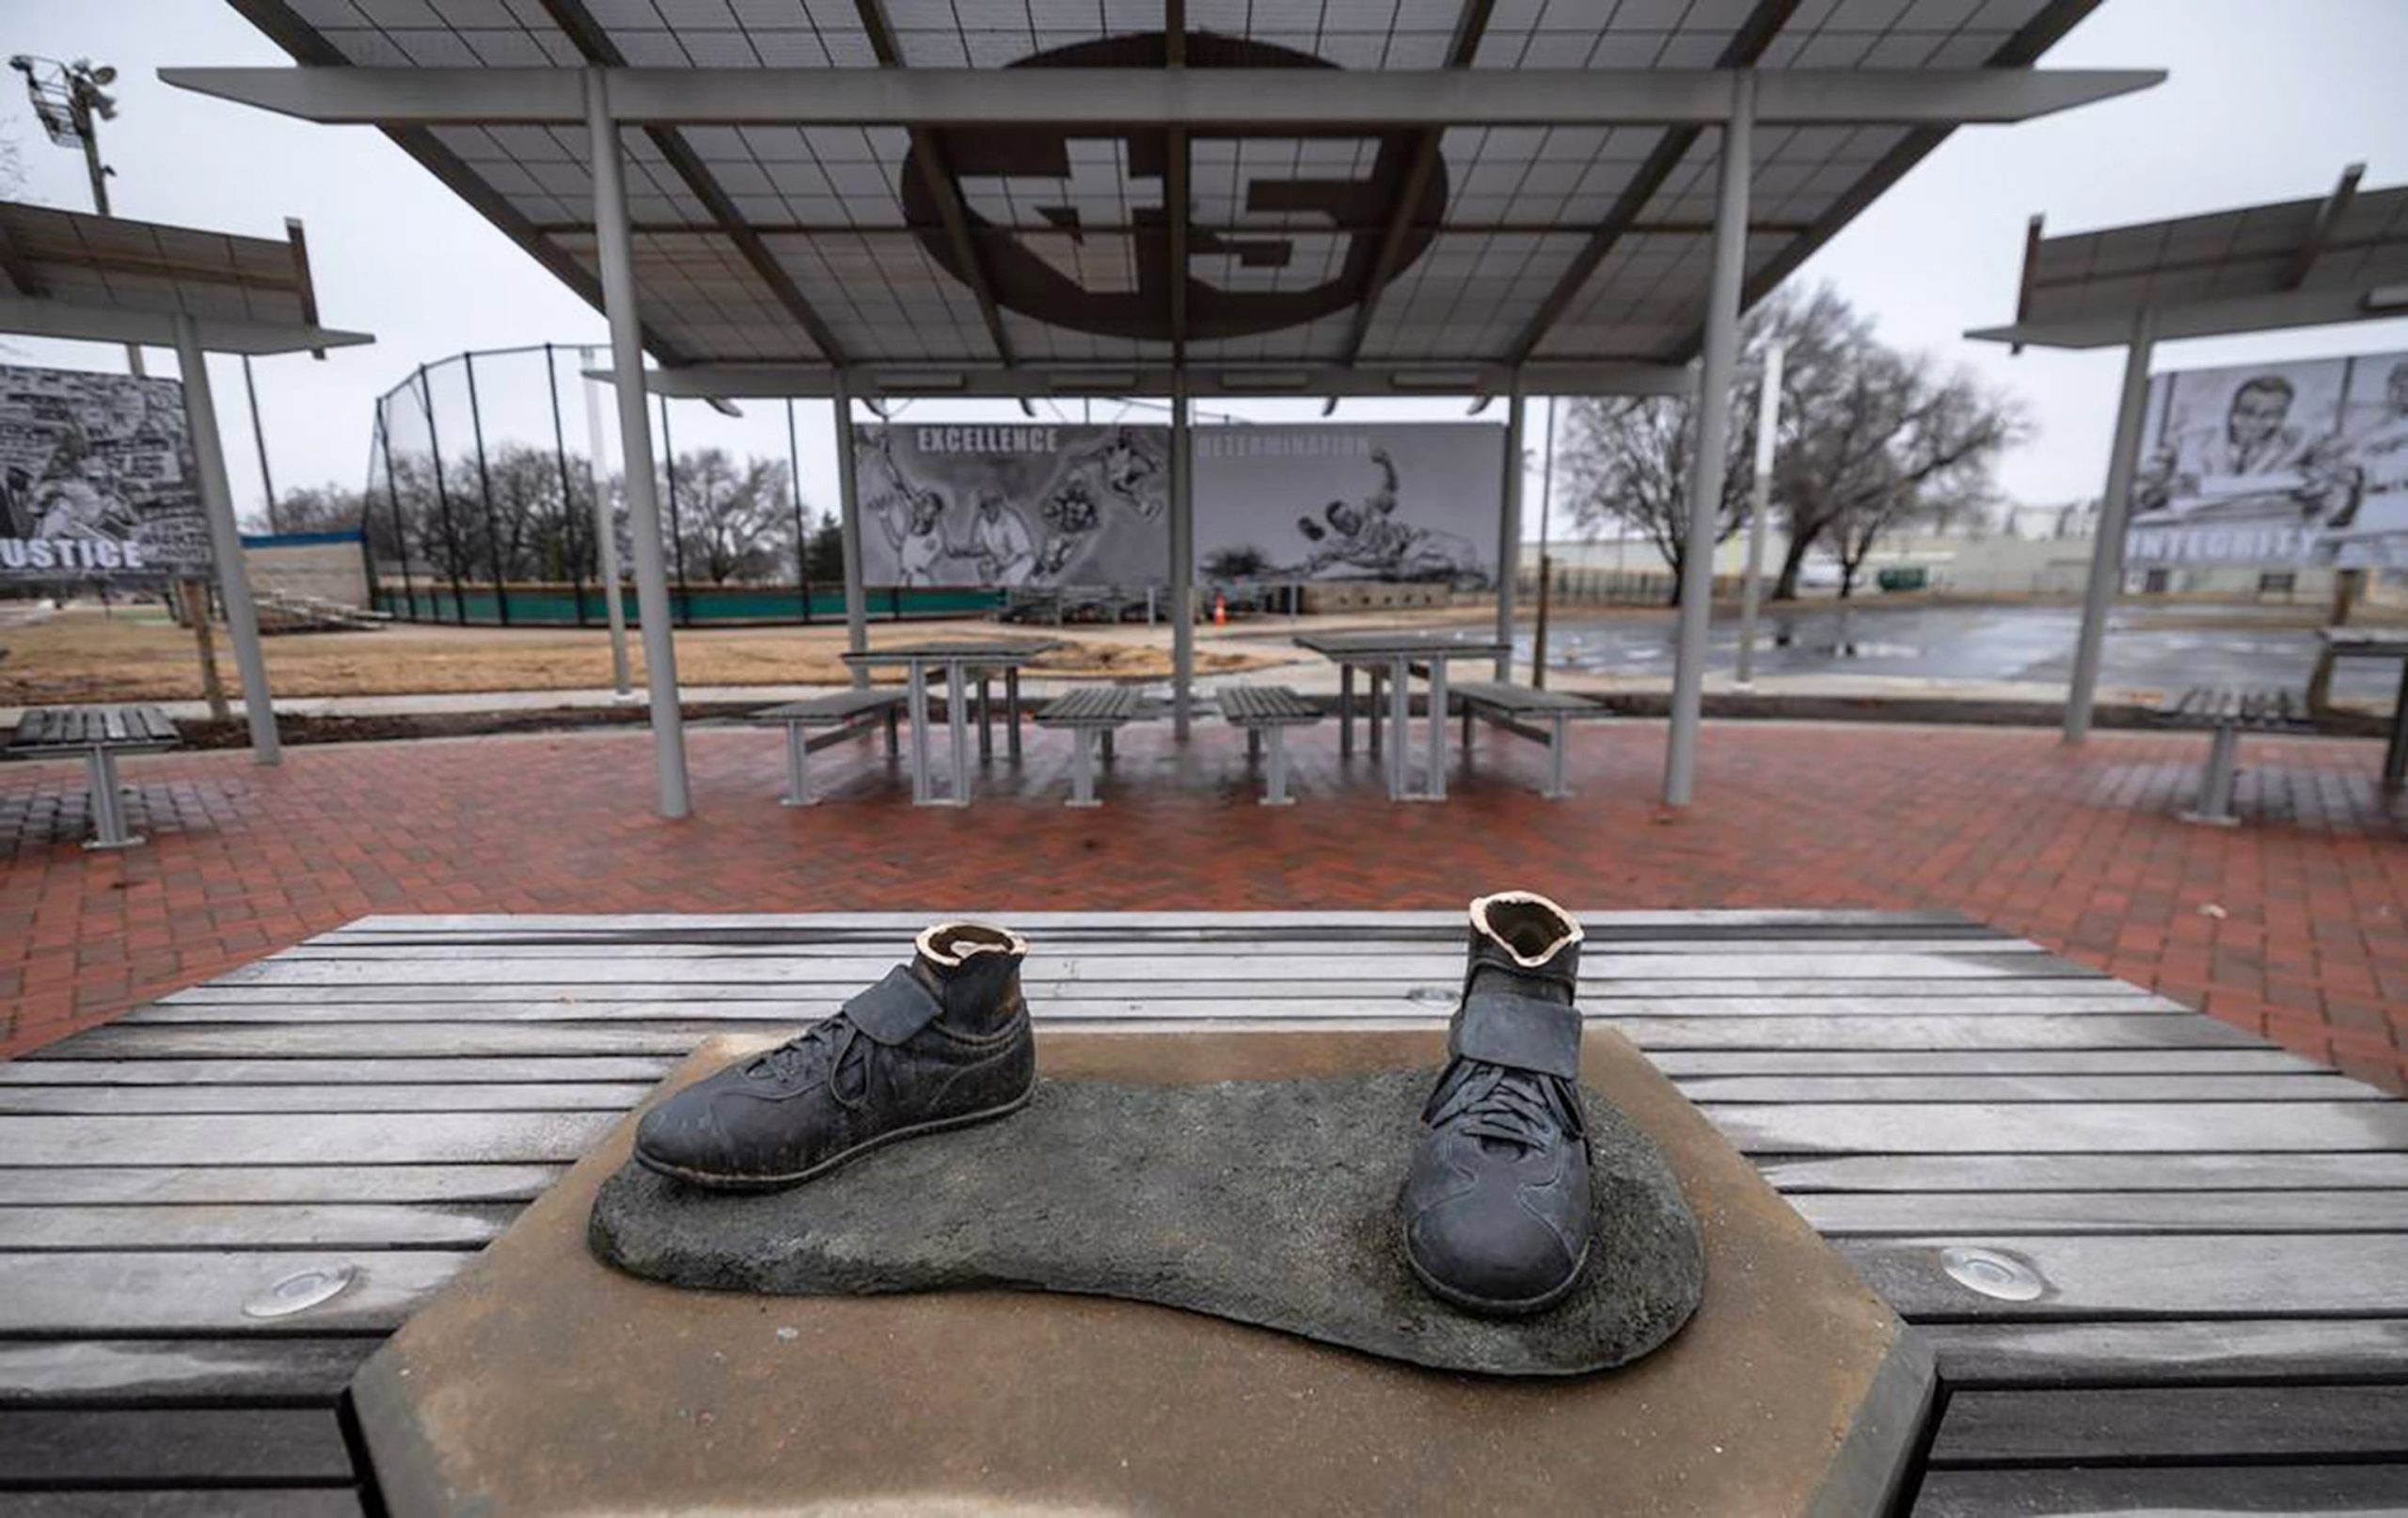 Authorities offering up to $7,500 reward for tips on stolen Jackie Robinson statue from Kansas park